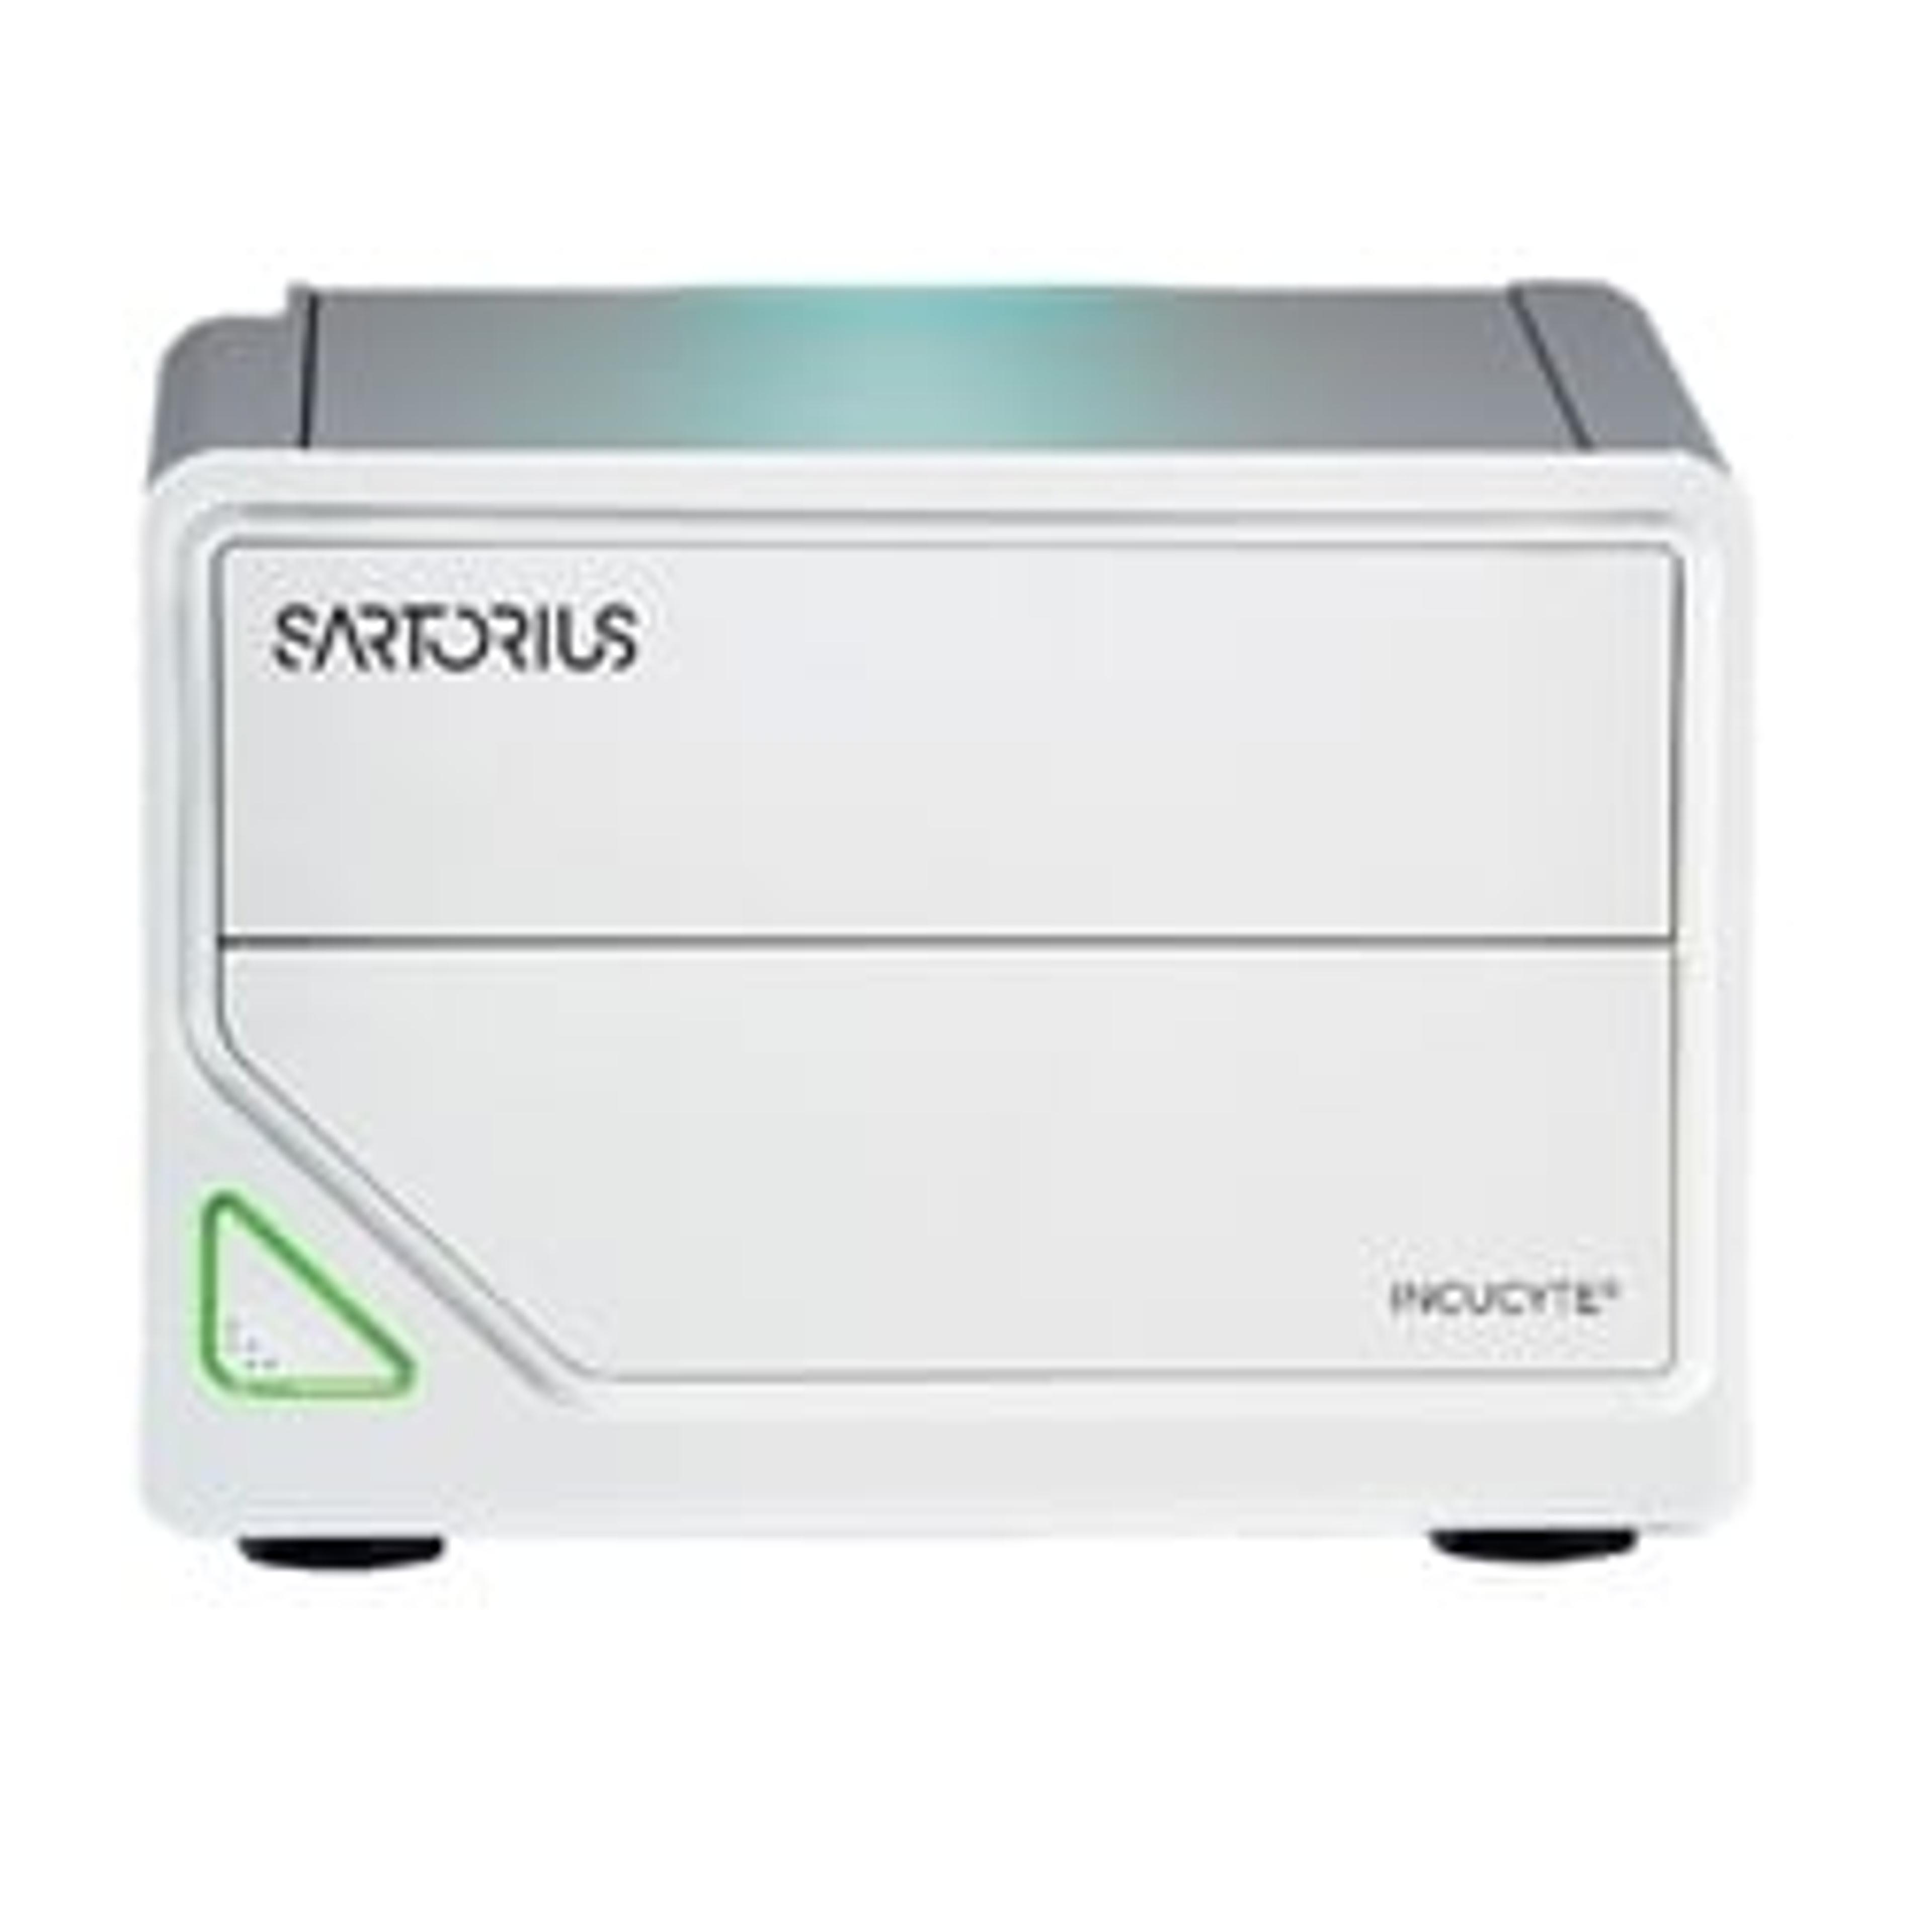 Incucyte® SX1 Live-Cell Analysis System